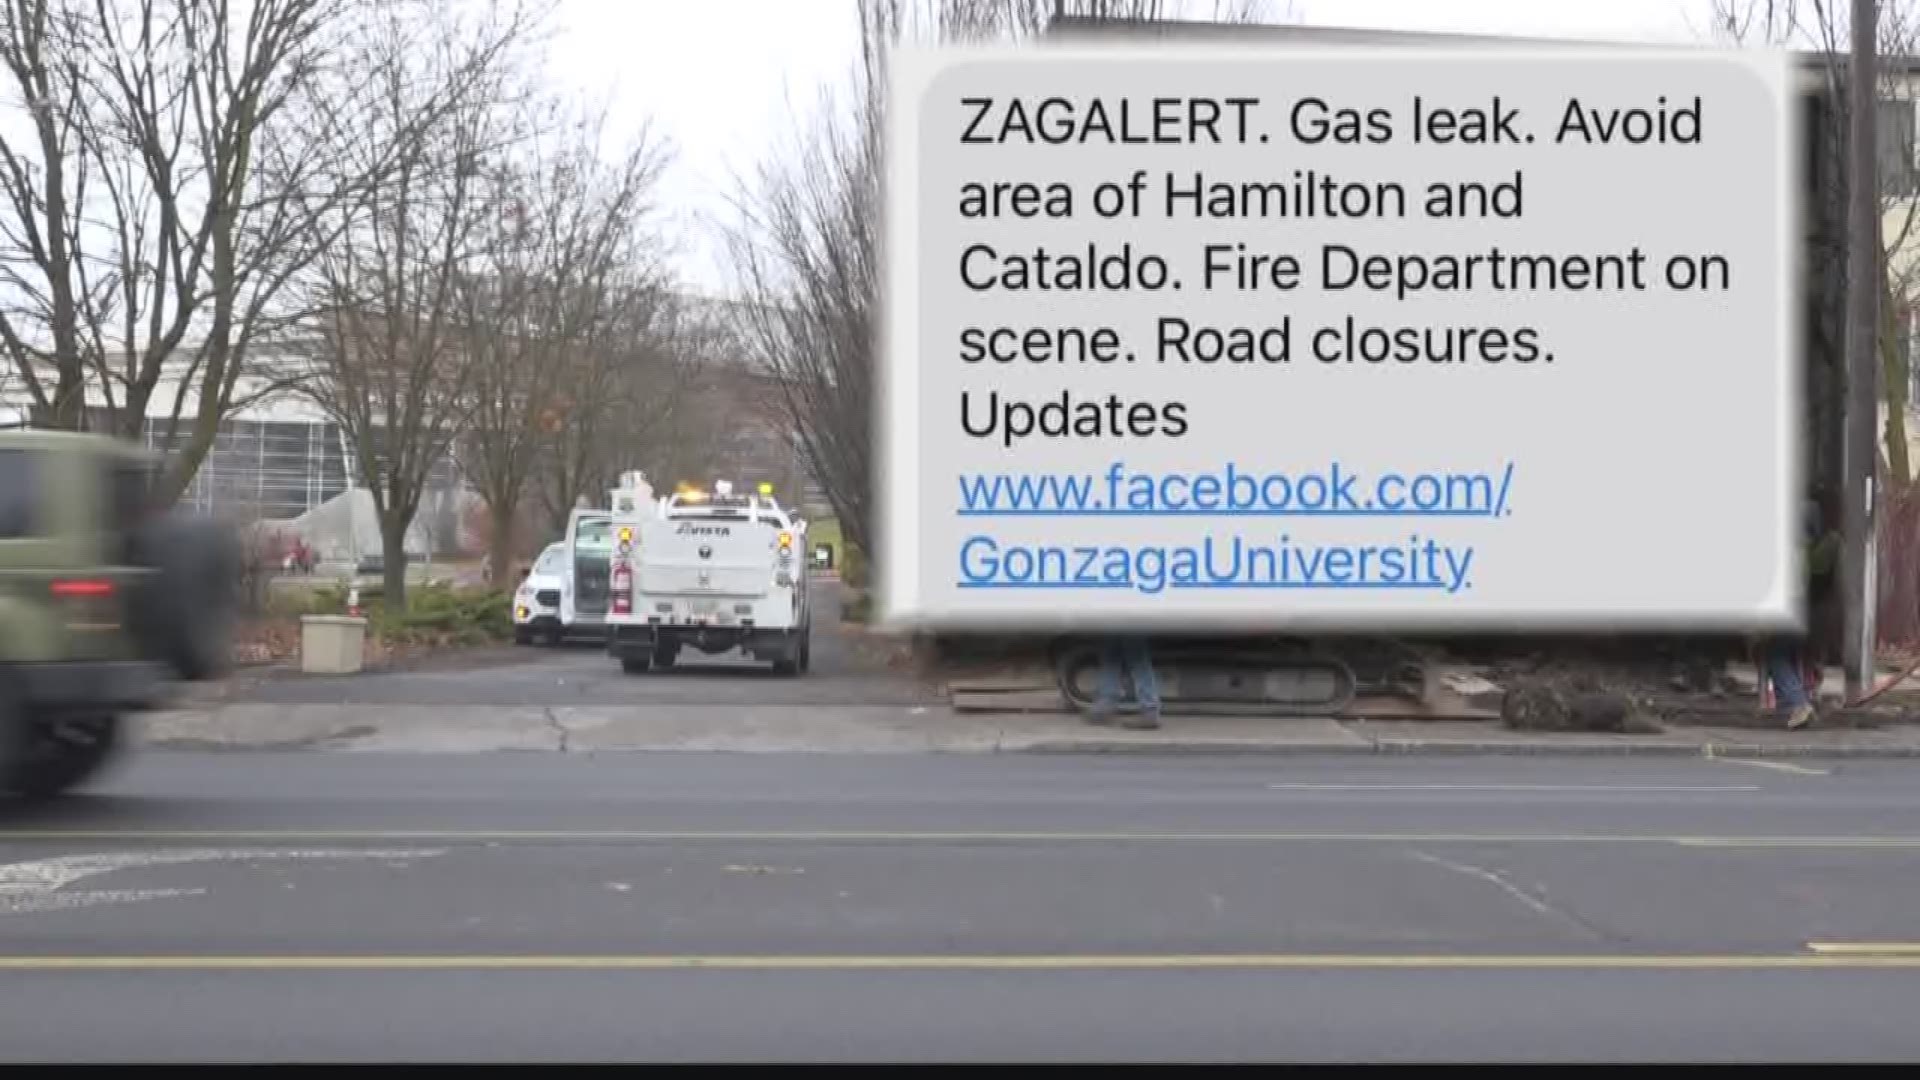 School leaders say 750 Gonzaga students were evacuated from three dorms after an excavator hit a nearby gas line.